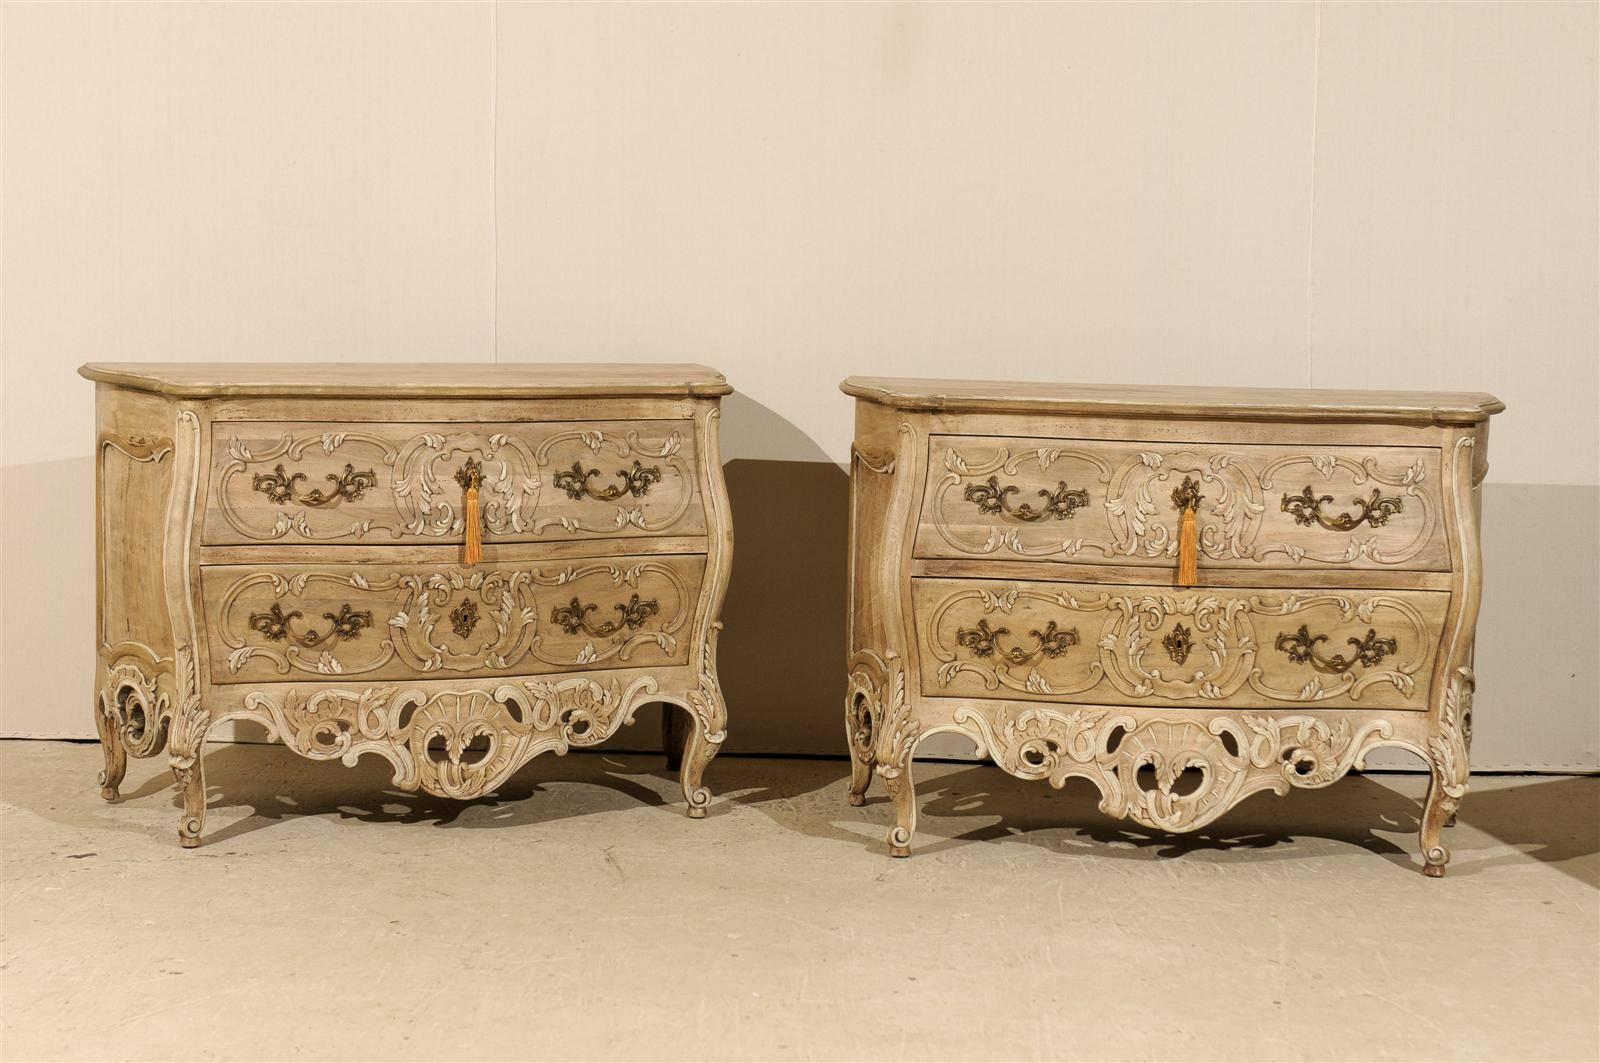 A pair of ashwood Rococo style chests from the late 20th century. This pair of chests features two richly carved drawers with Rococo style pulls and escutcheons. The skirt is scalloped on three sides. The front skirt features a decorated design of